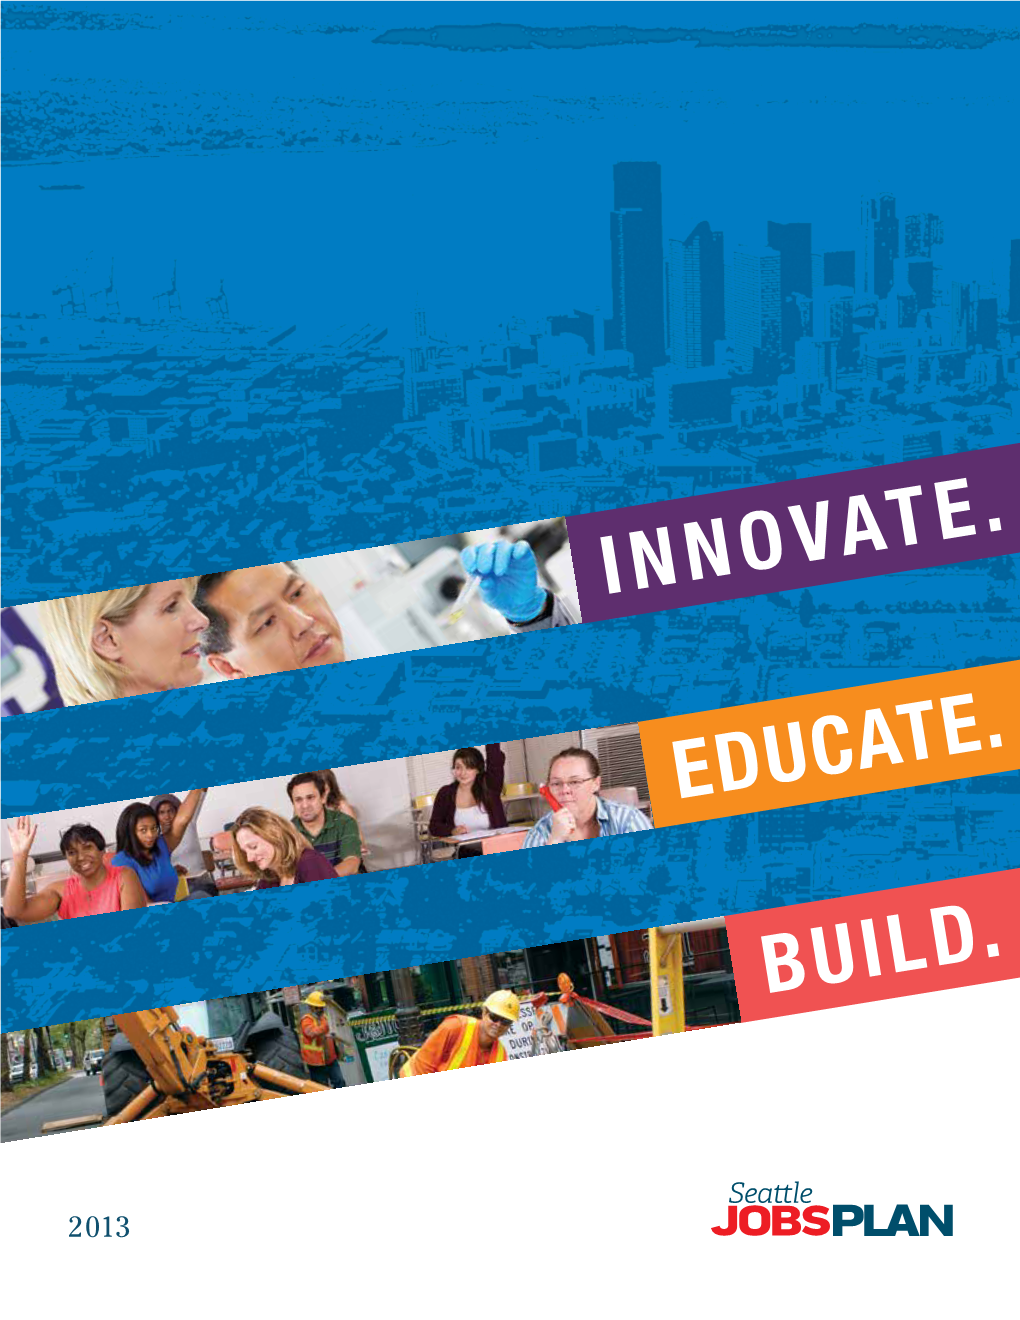 Seattle Jobs Plan Update Is Focused on Supporting Innovation and Building Shared Prosperity